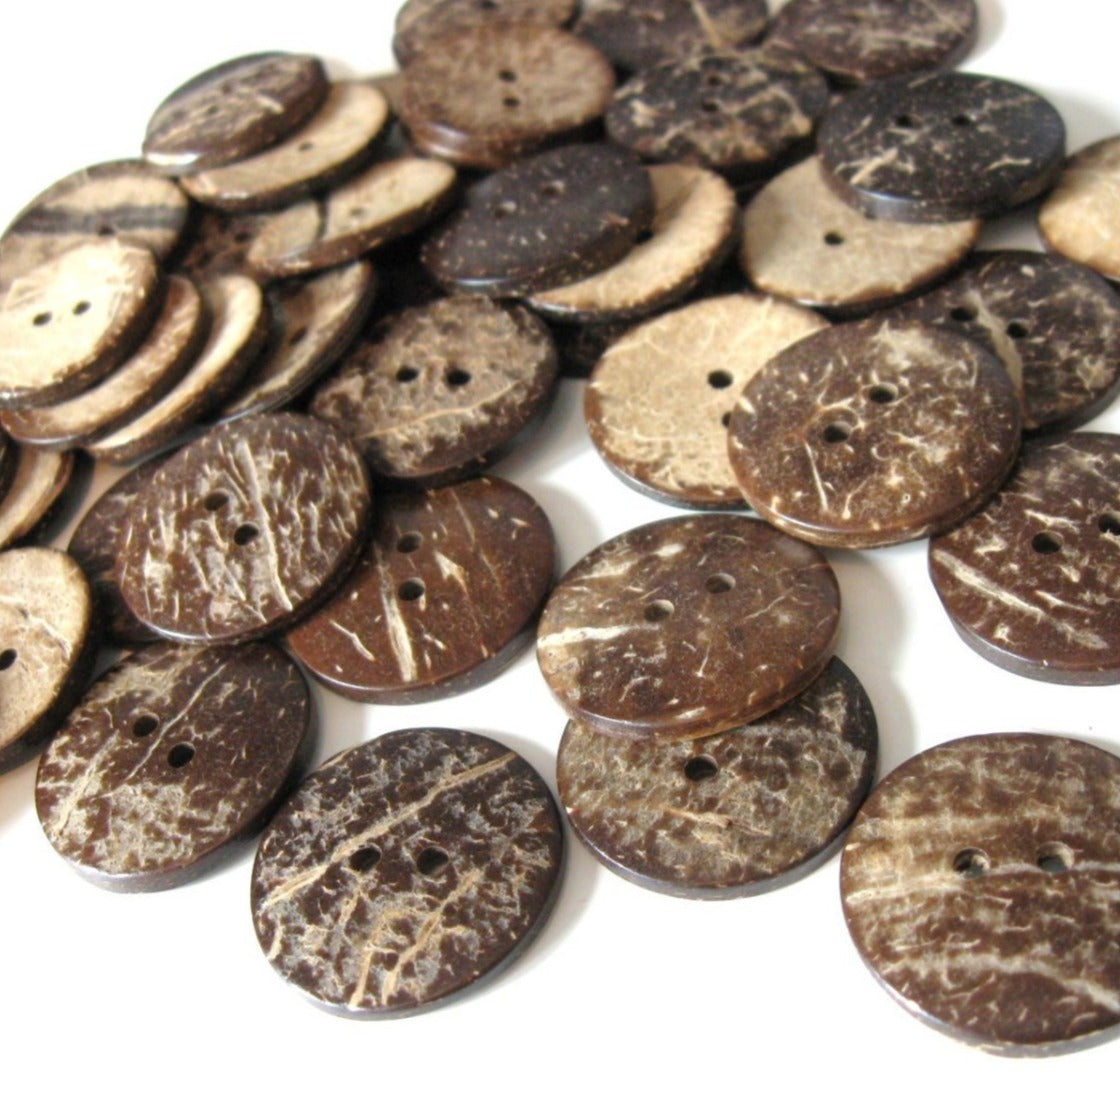 Coconut wooden buttons, 8 sizes available